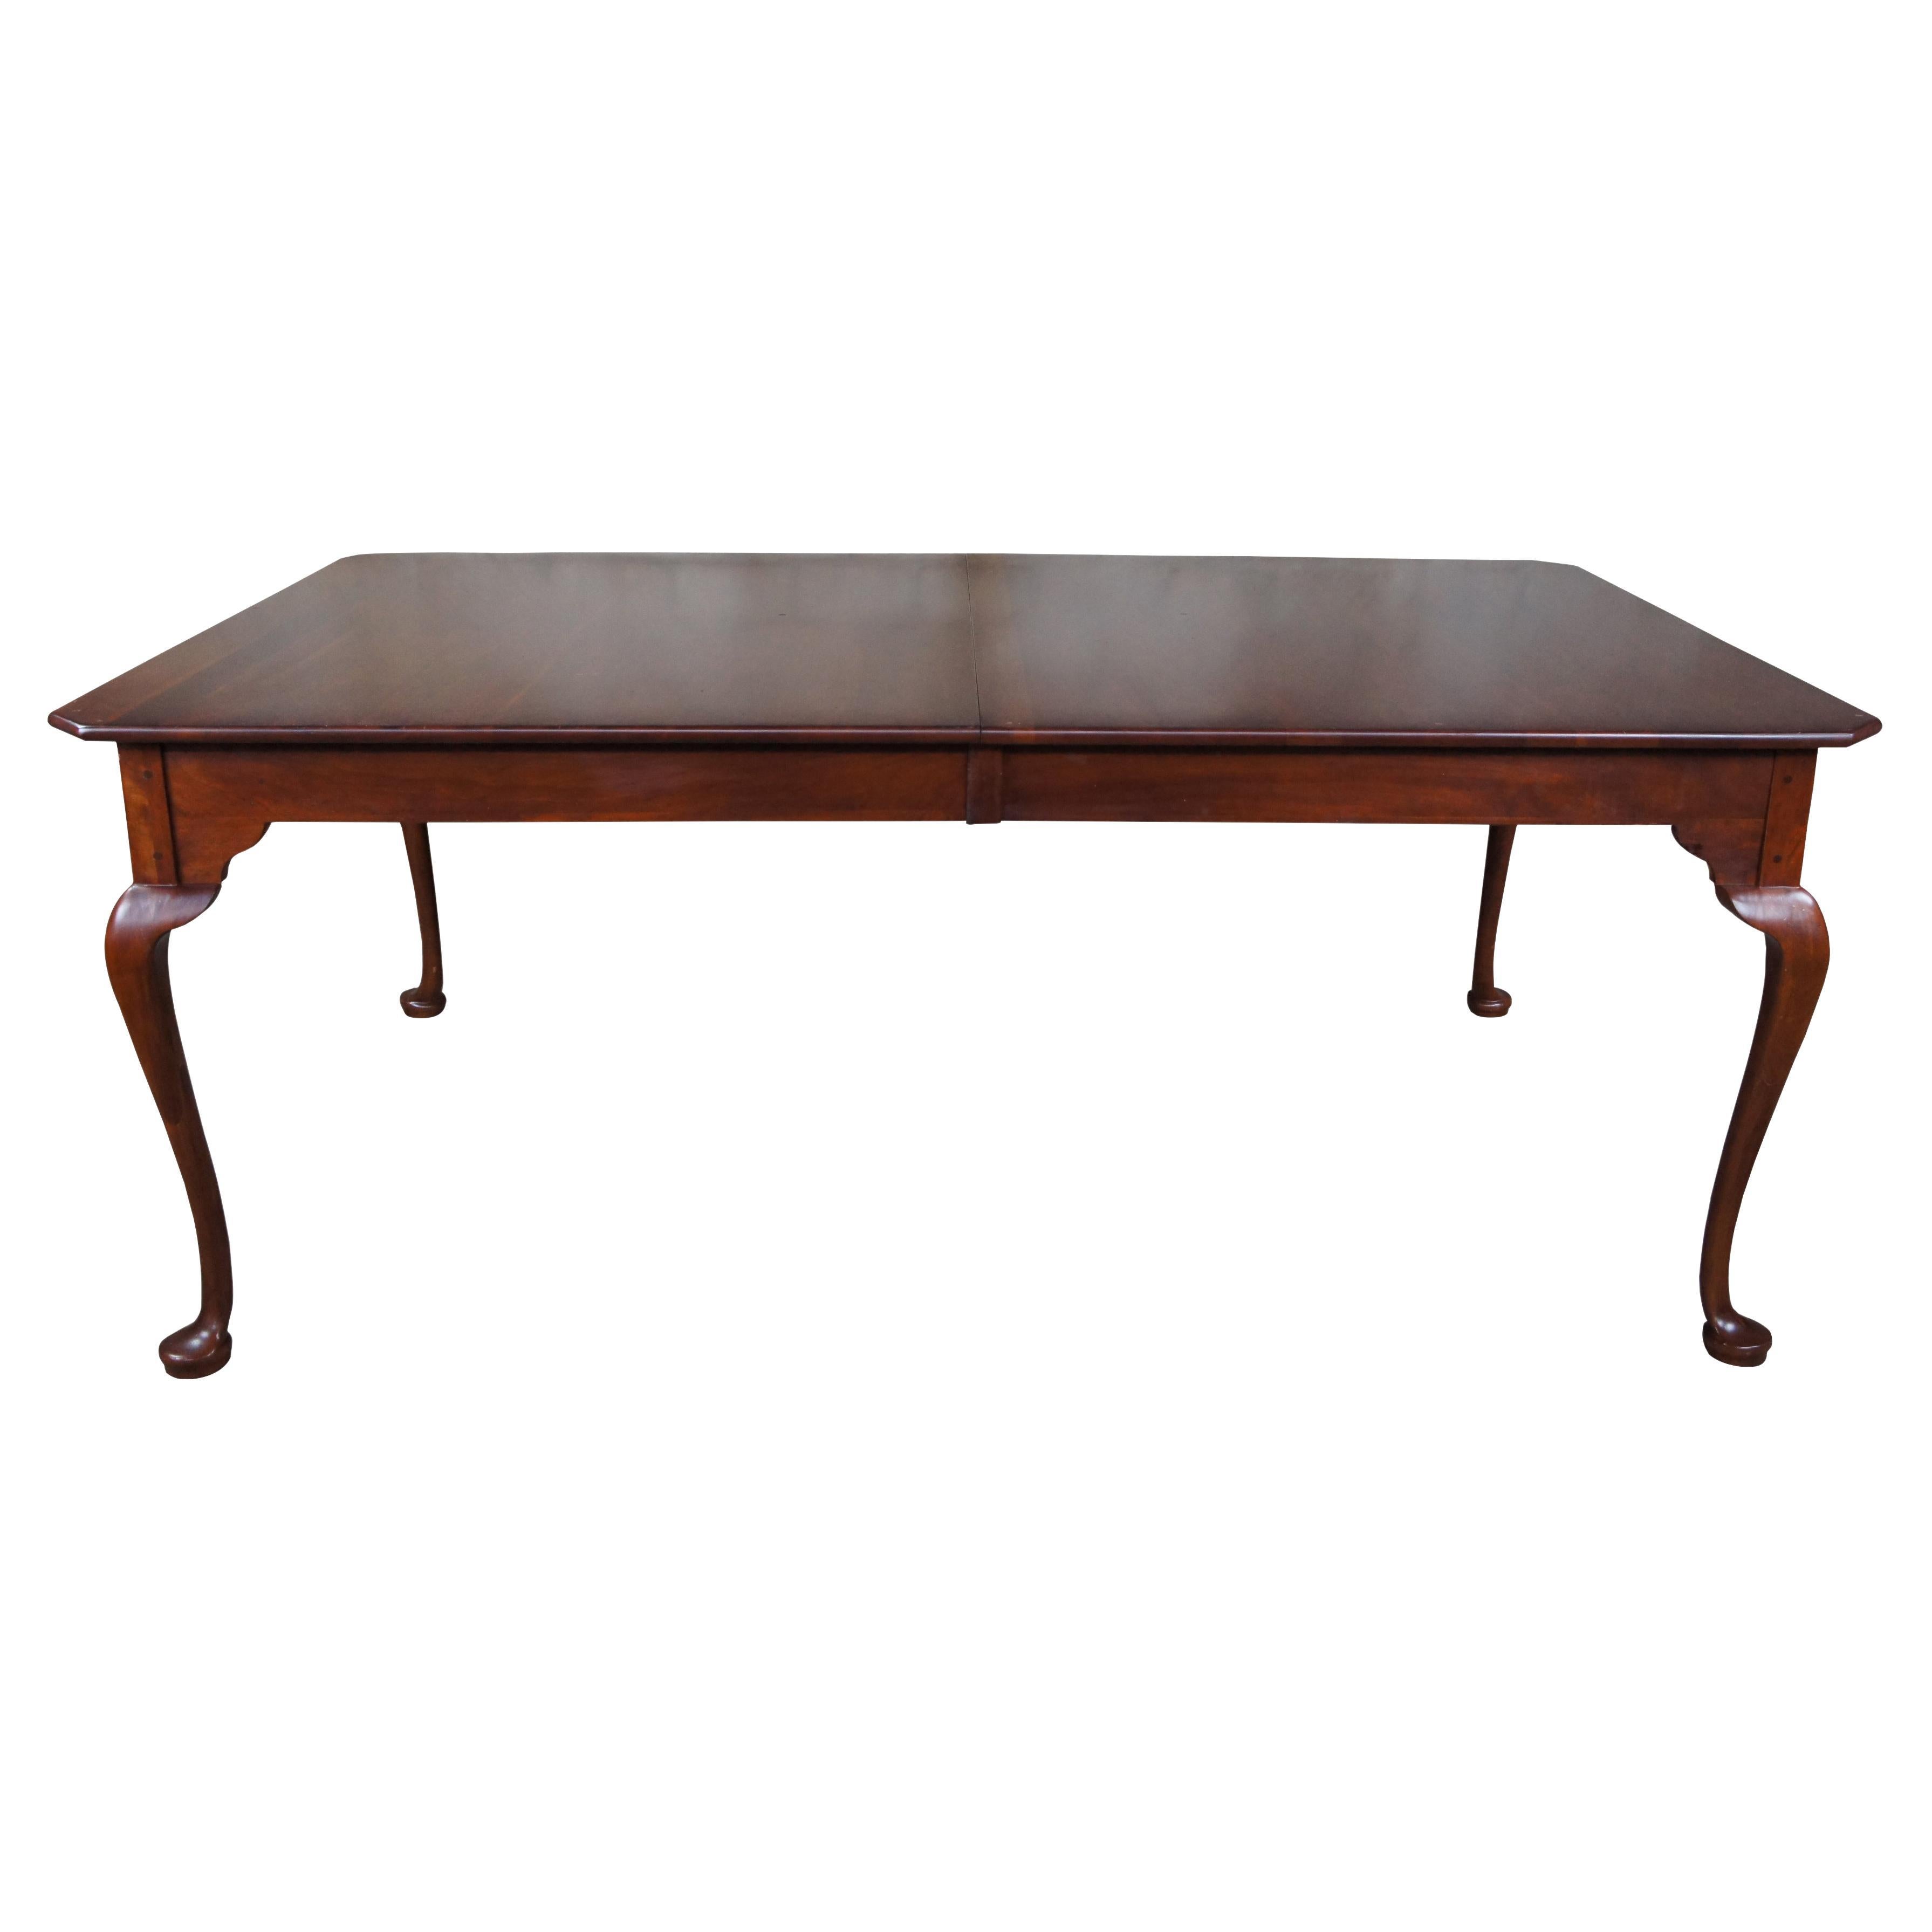 Vintage Lexington Furniture Bob Timberlake dining table. Made of solid cherry featuring Queen Anne styling with rectangular form 2 drawers and custom glass top. 833-879.

Measures: 45